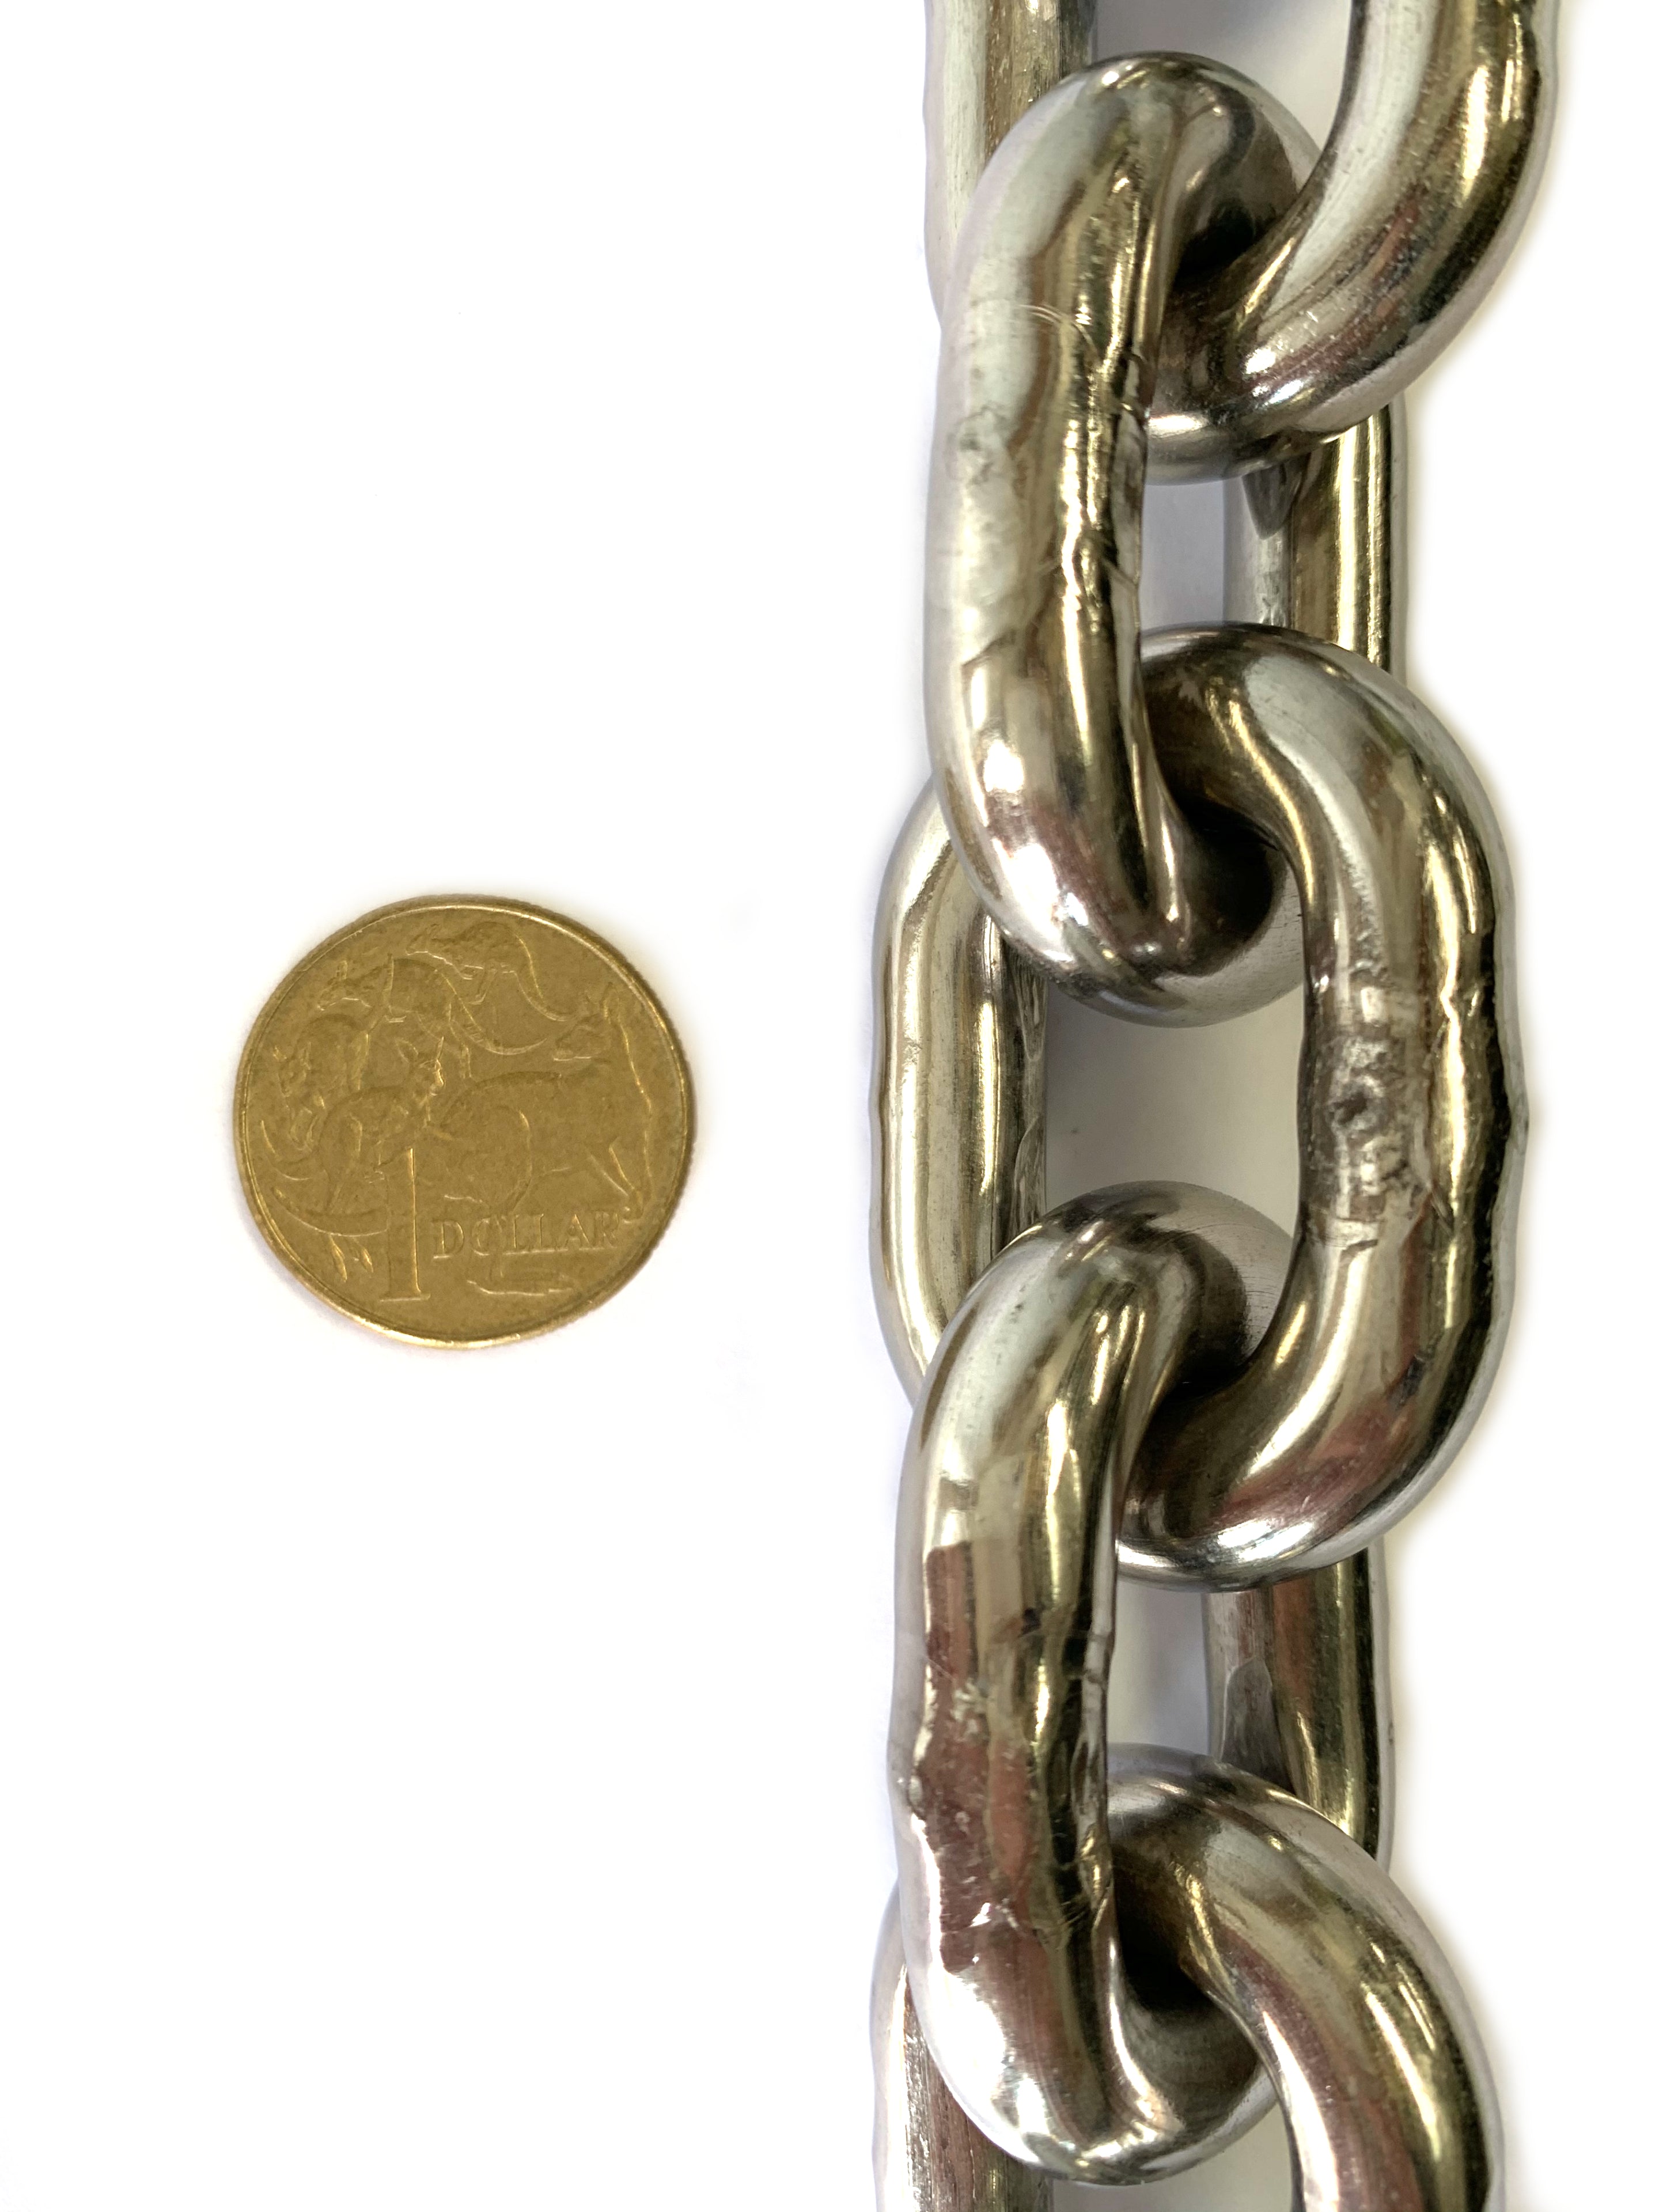 10mm stainless steel welded short link chain, order by the metre. Australia.